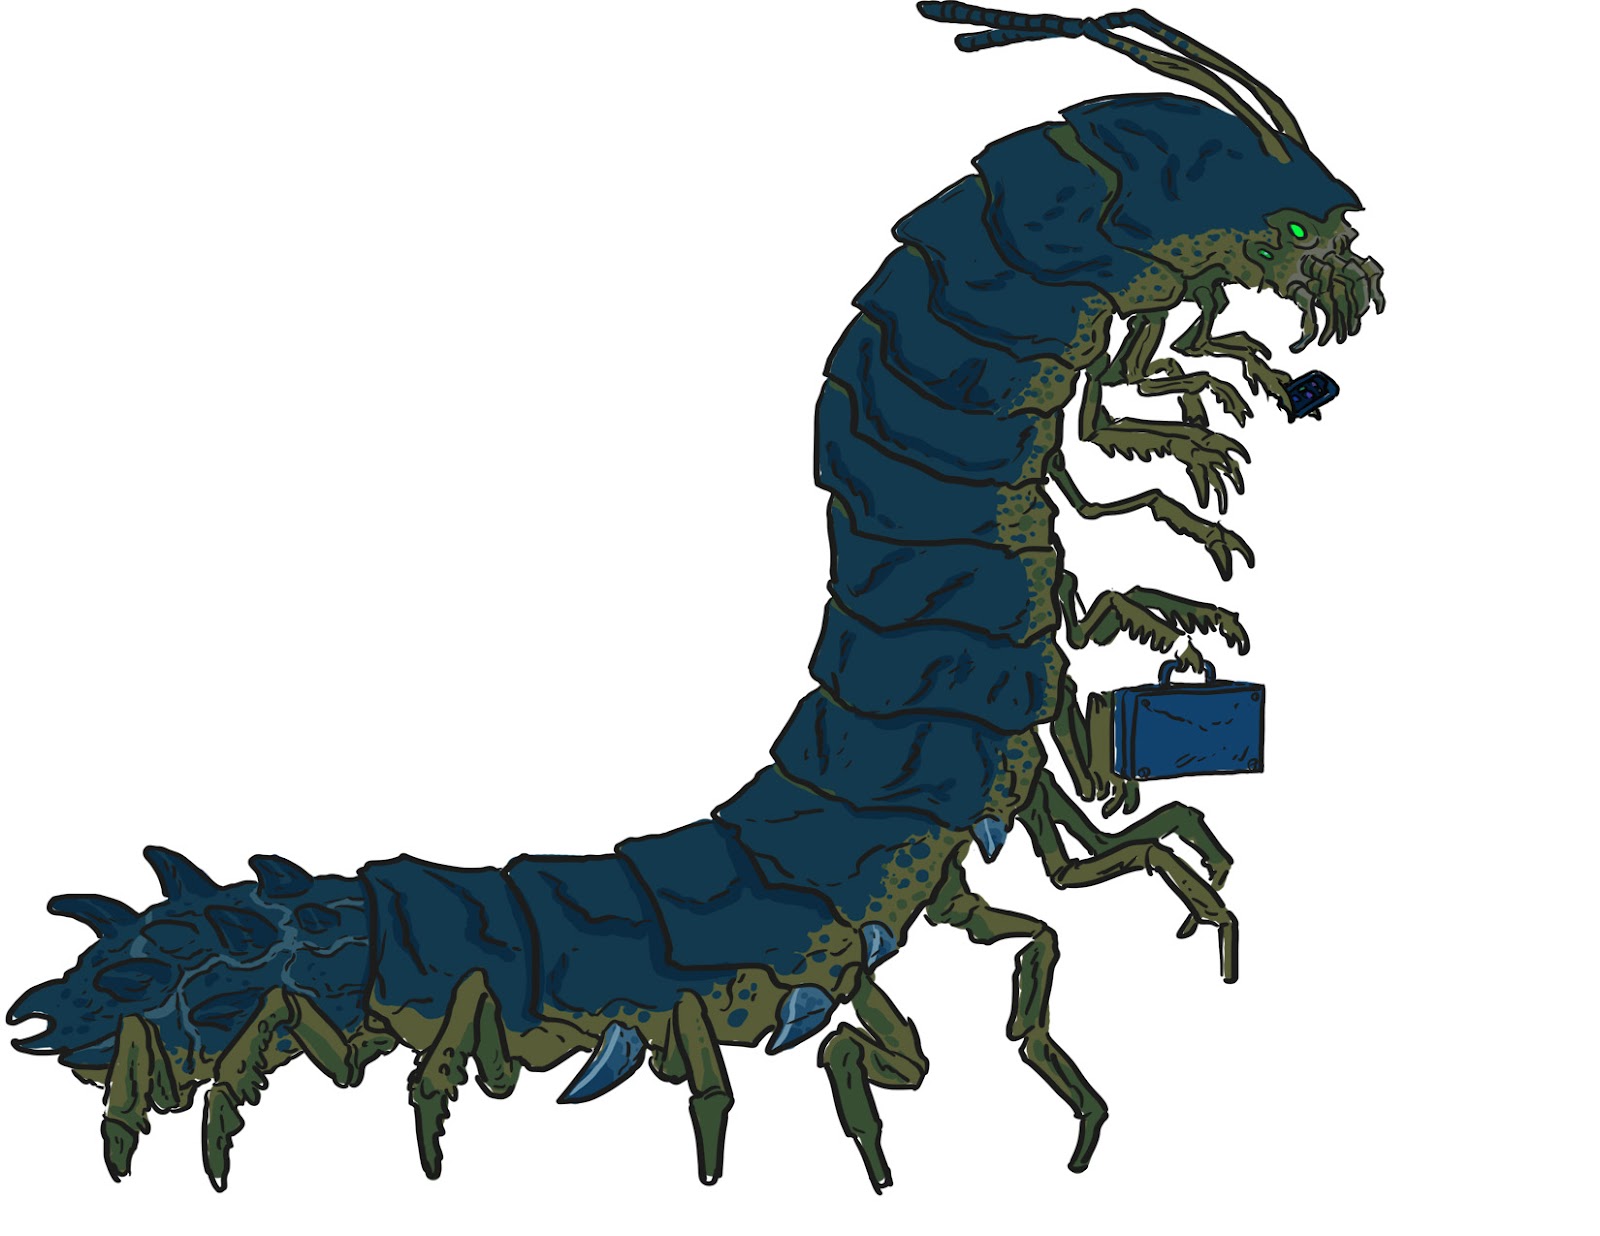 Centipede alien dude from Warhead cover.